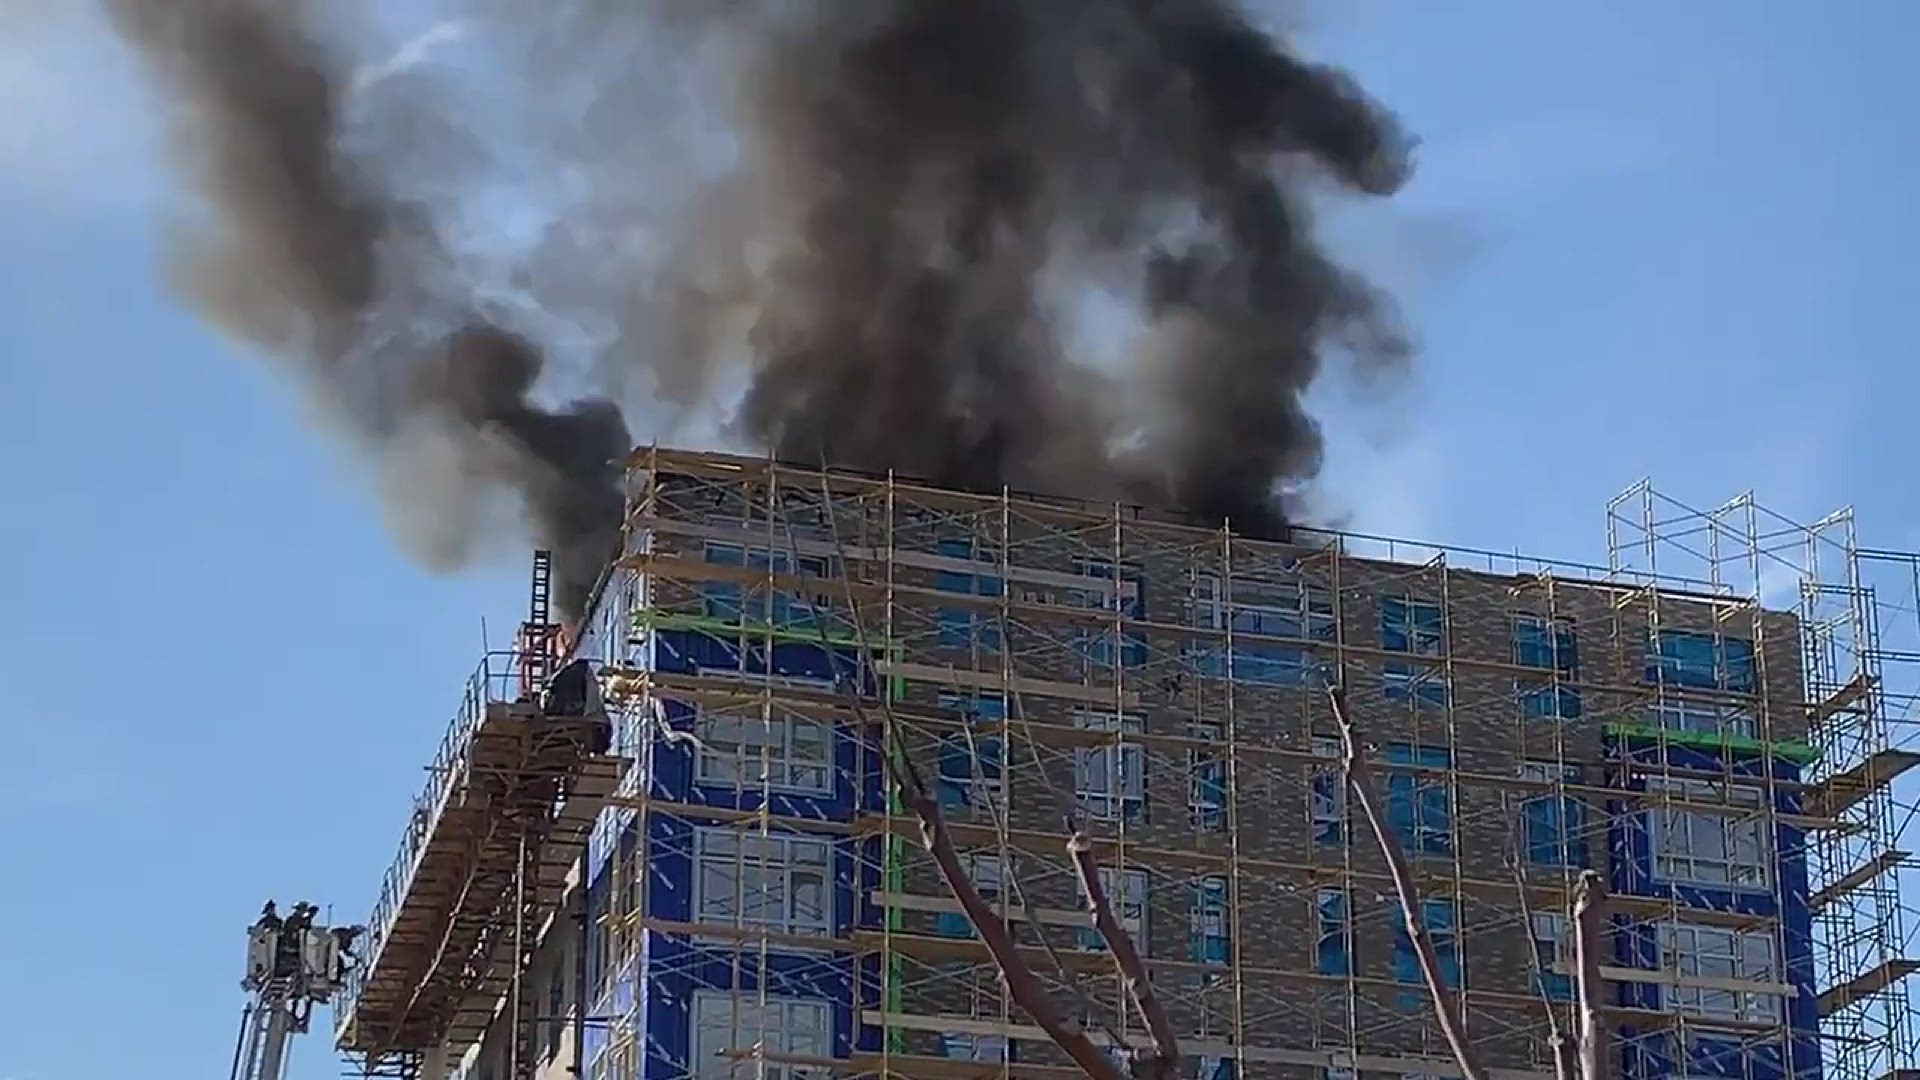 D.C. Fire & EMS officials say that heavy fire and smoke are coming from the roof of a multi-story building under construction.